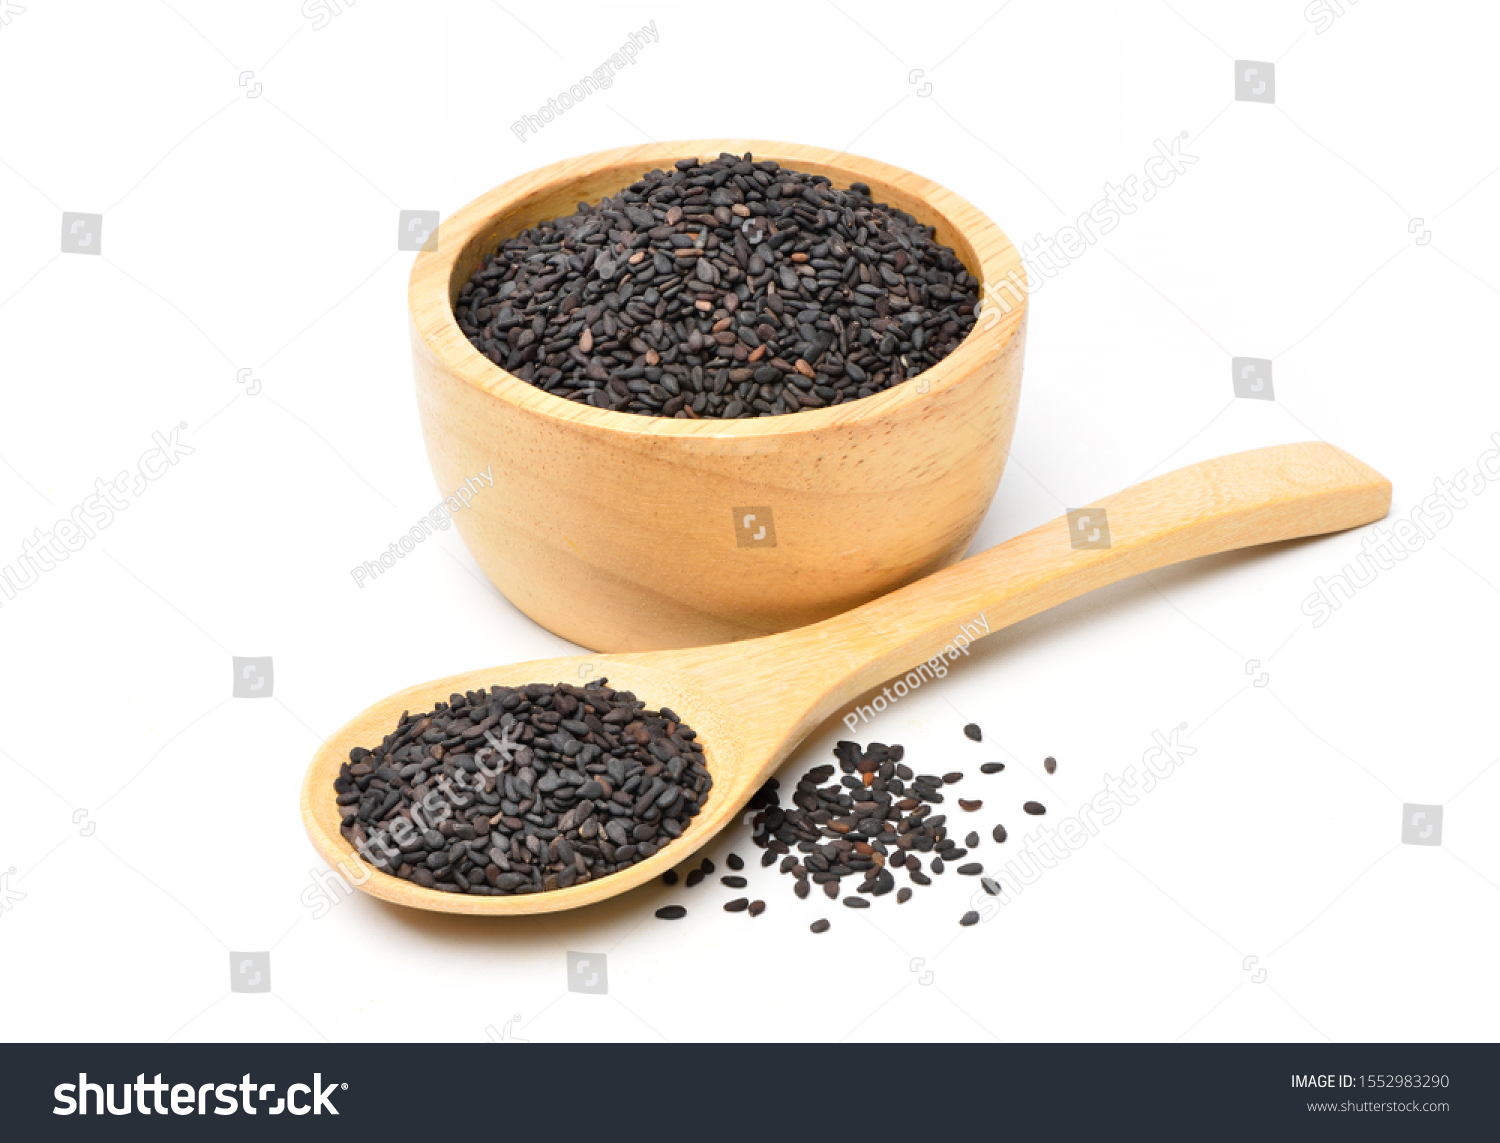 Black sesame seeds in wooden bowl and wooden spoon isolated on white background. #1552983290